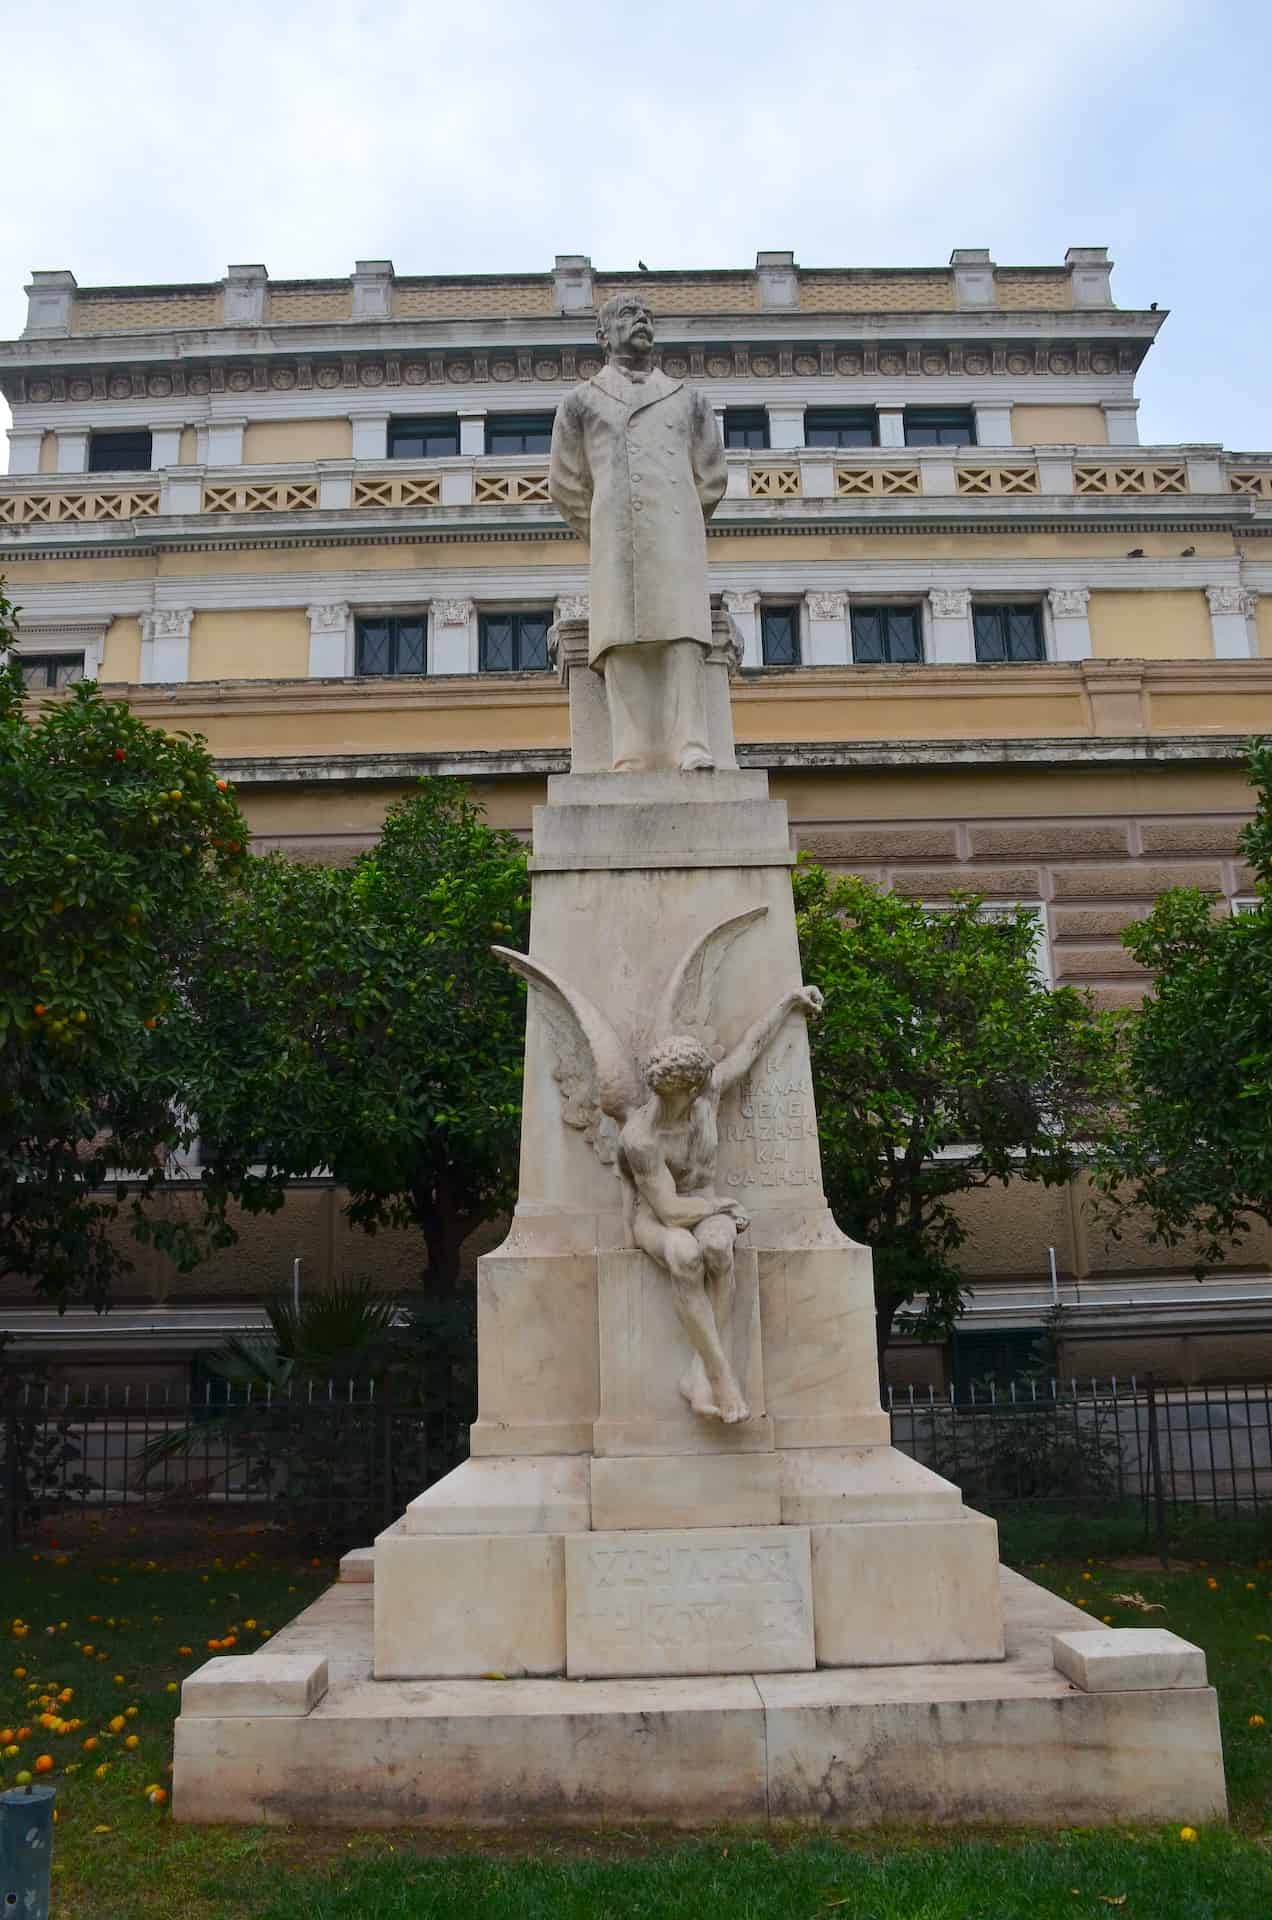 Statue of Charilaos Trikoupis at the Old Parliament House (National Historical Museum) in Athens, Greece